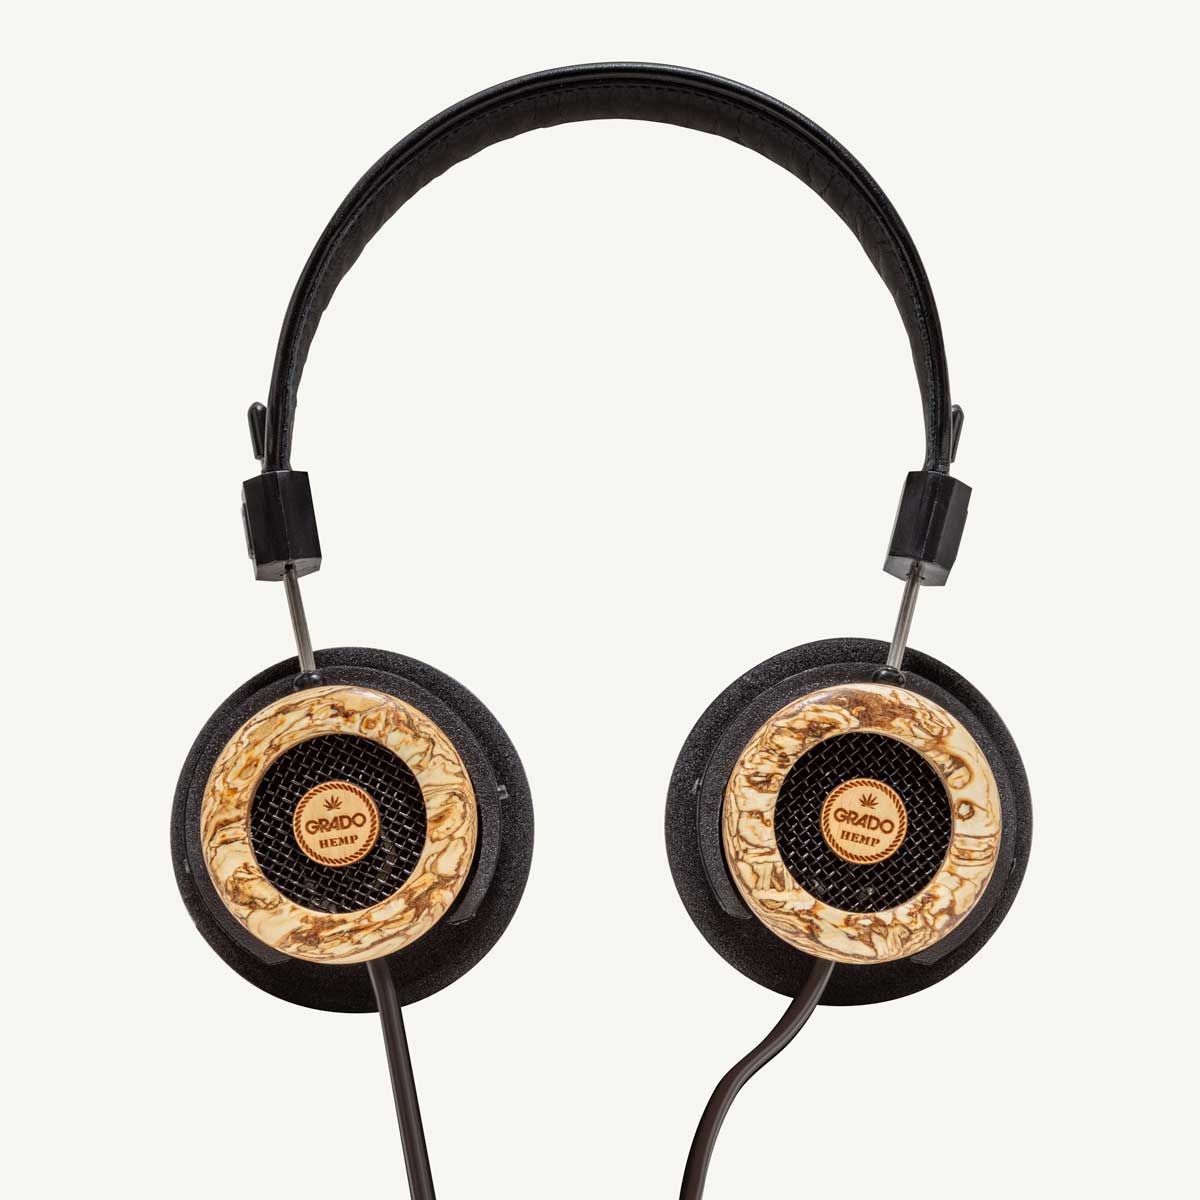 Front view photo of the Hemp Headphones on a transparent background